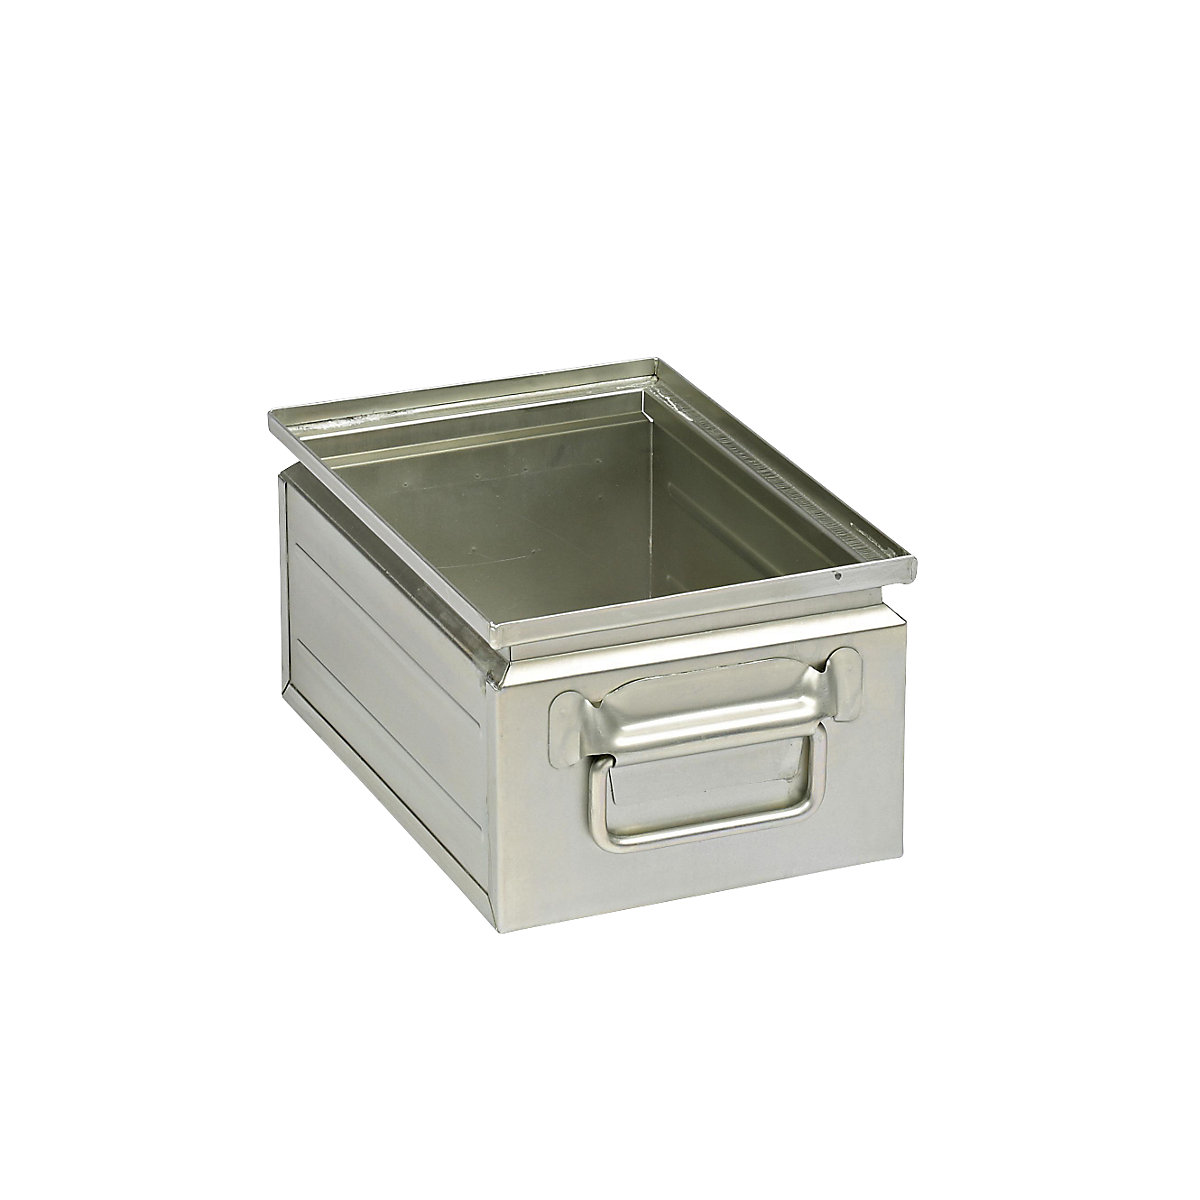 Stacking container made of sheet steel, capacity approx. 9 l, zinc plated